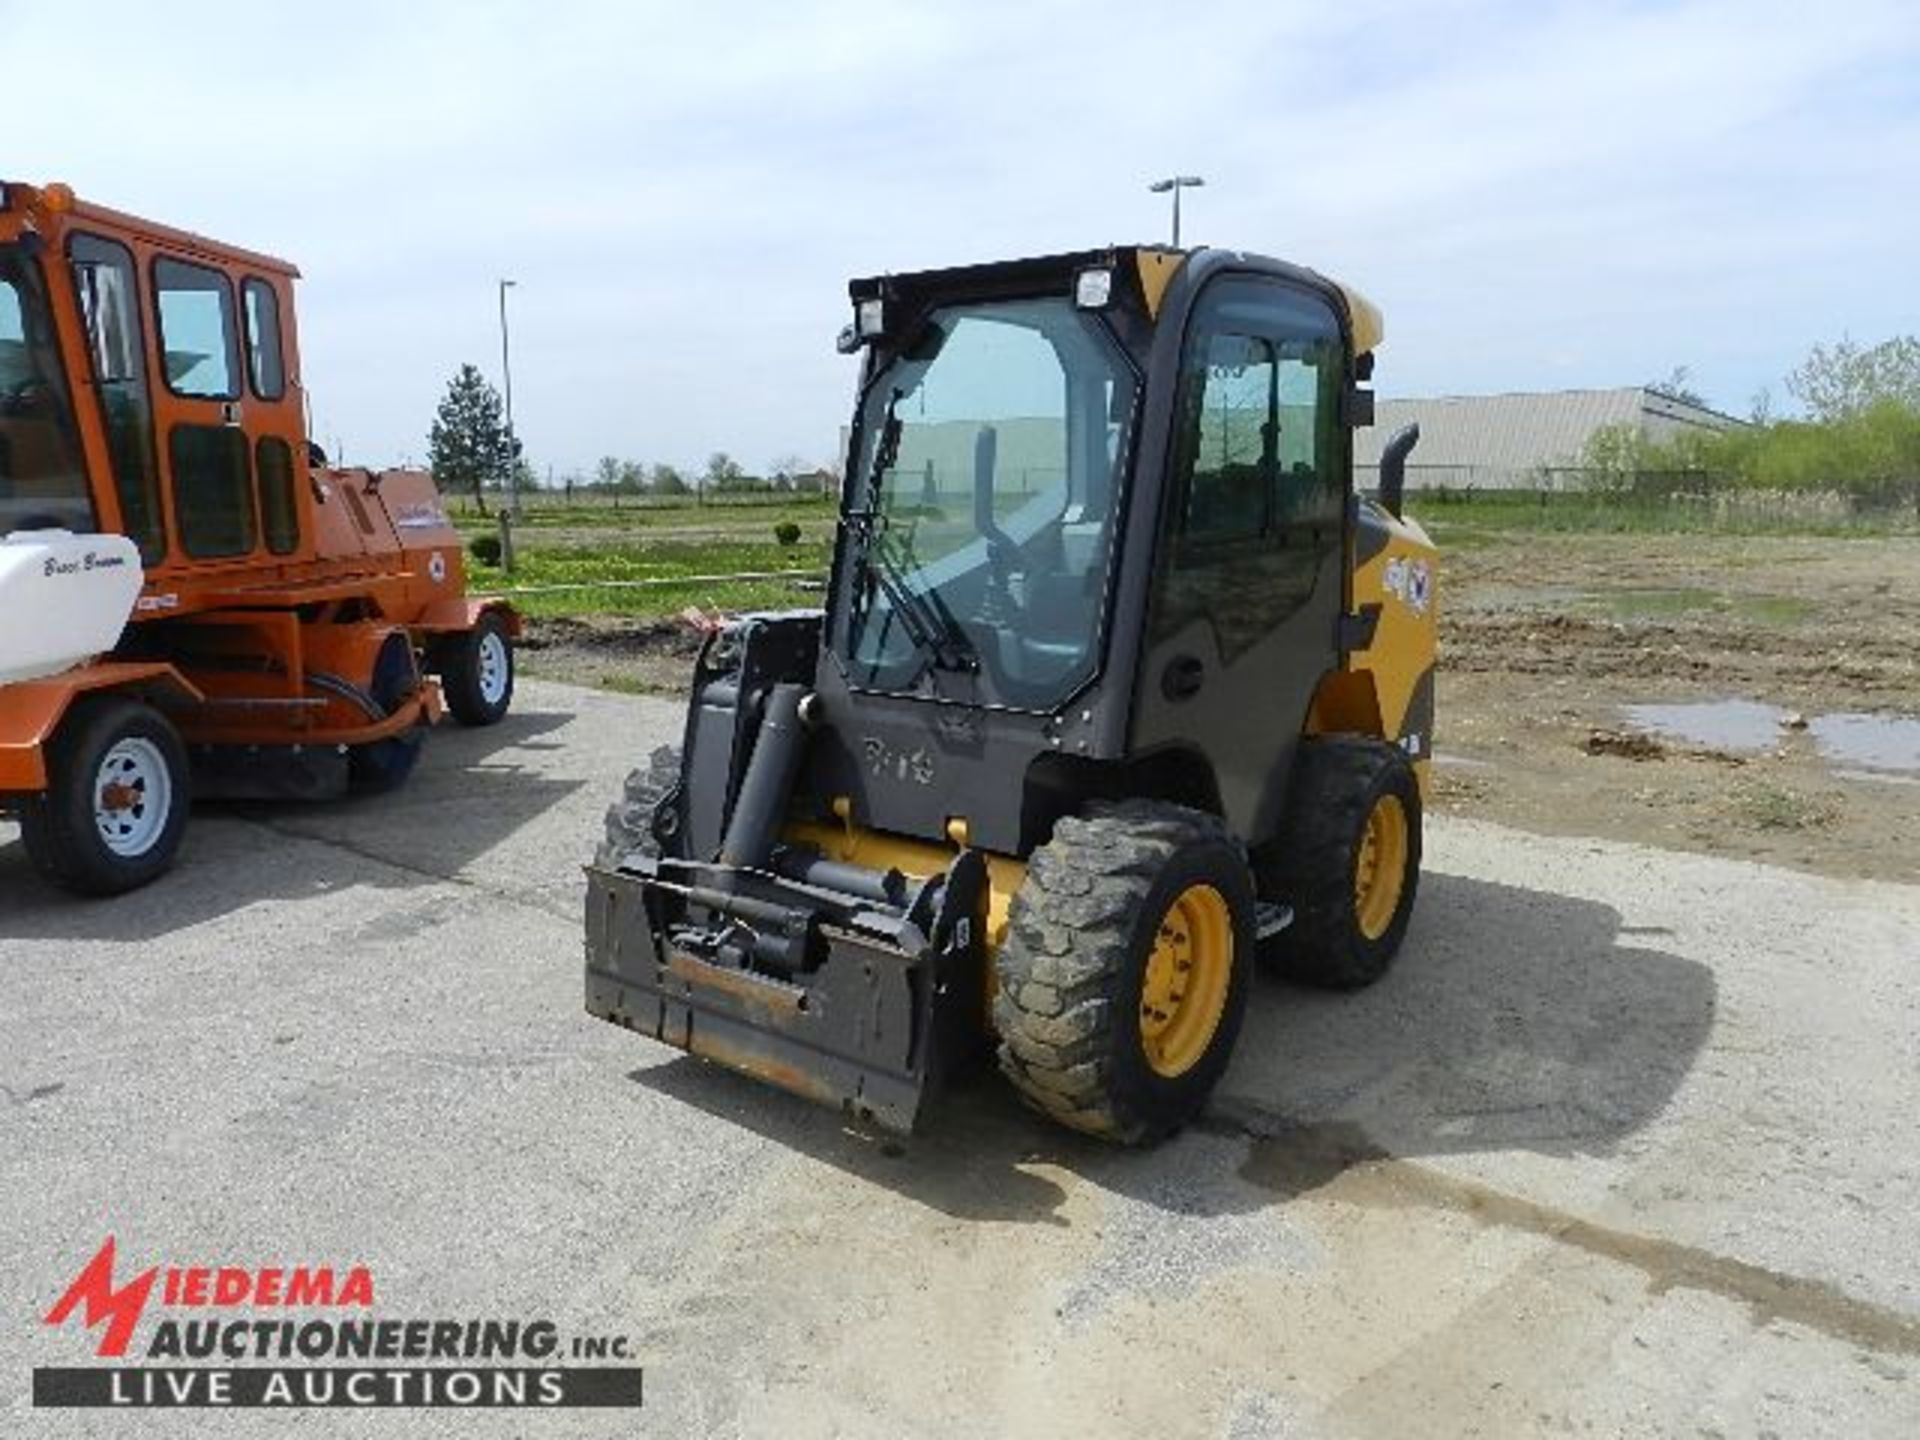 2014 VOLVO MC115C T4 WHEELED SKID STEER, DELUXE PACKAGE, 197 HOURS SHOWING, JOYSTICK CONTROL, 4